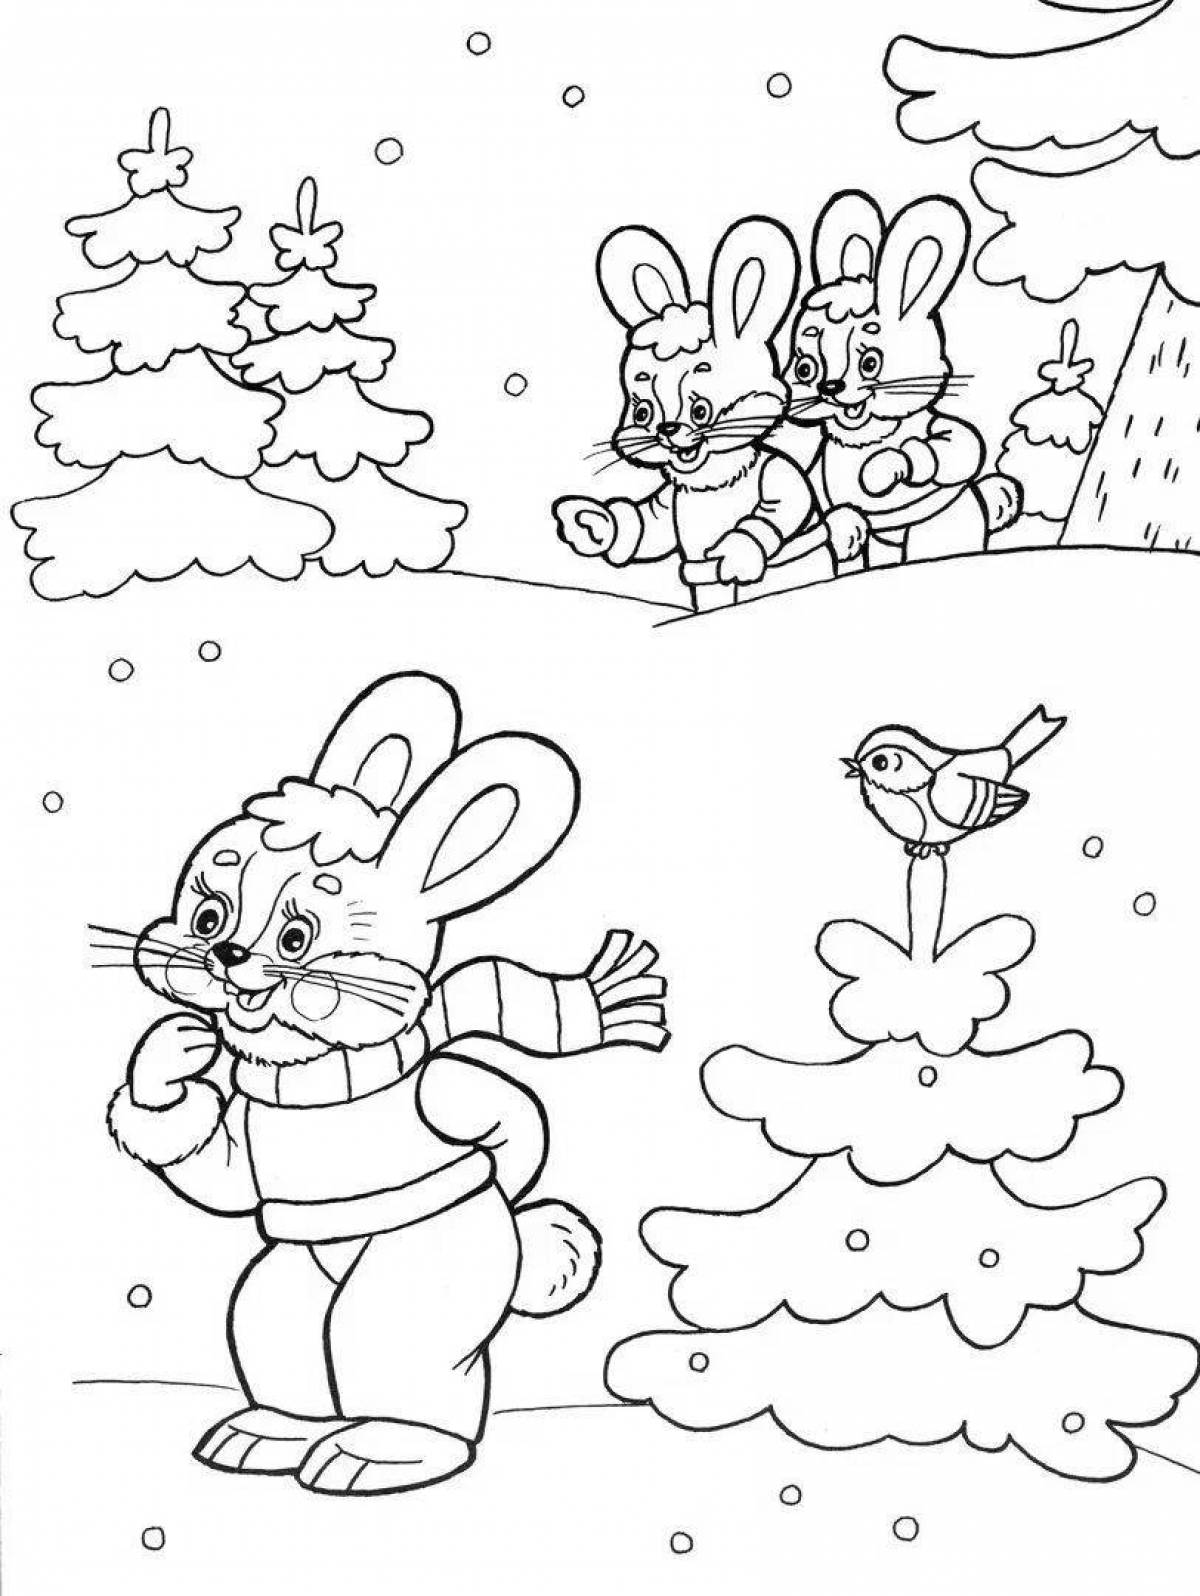 Fun coloring frost and hare